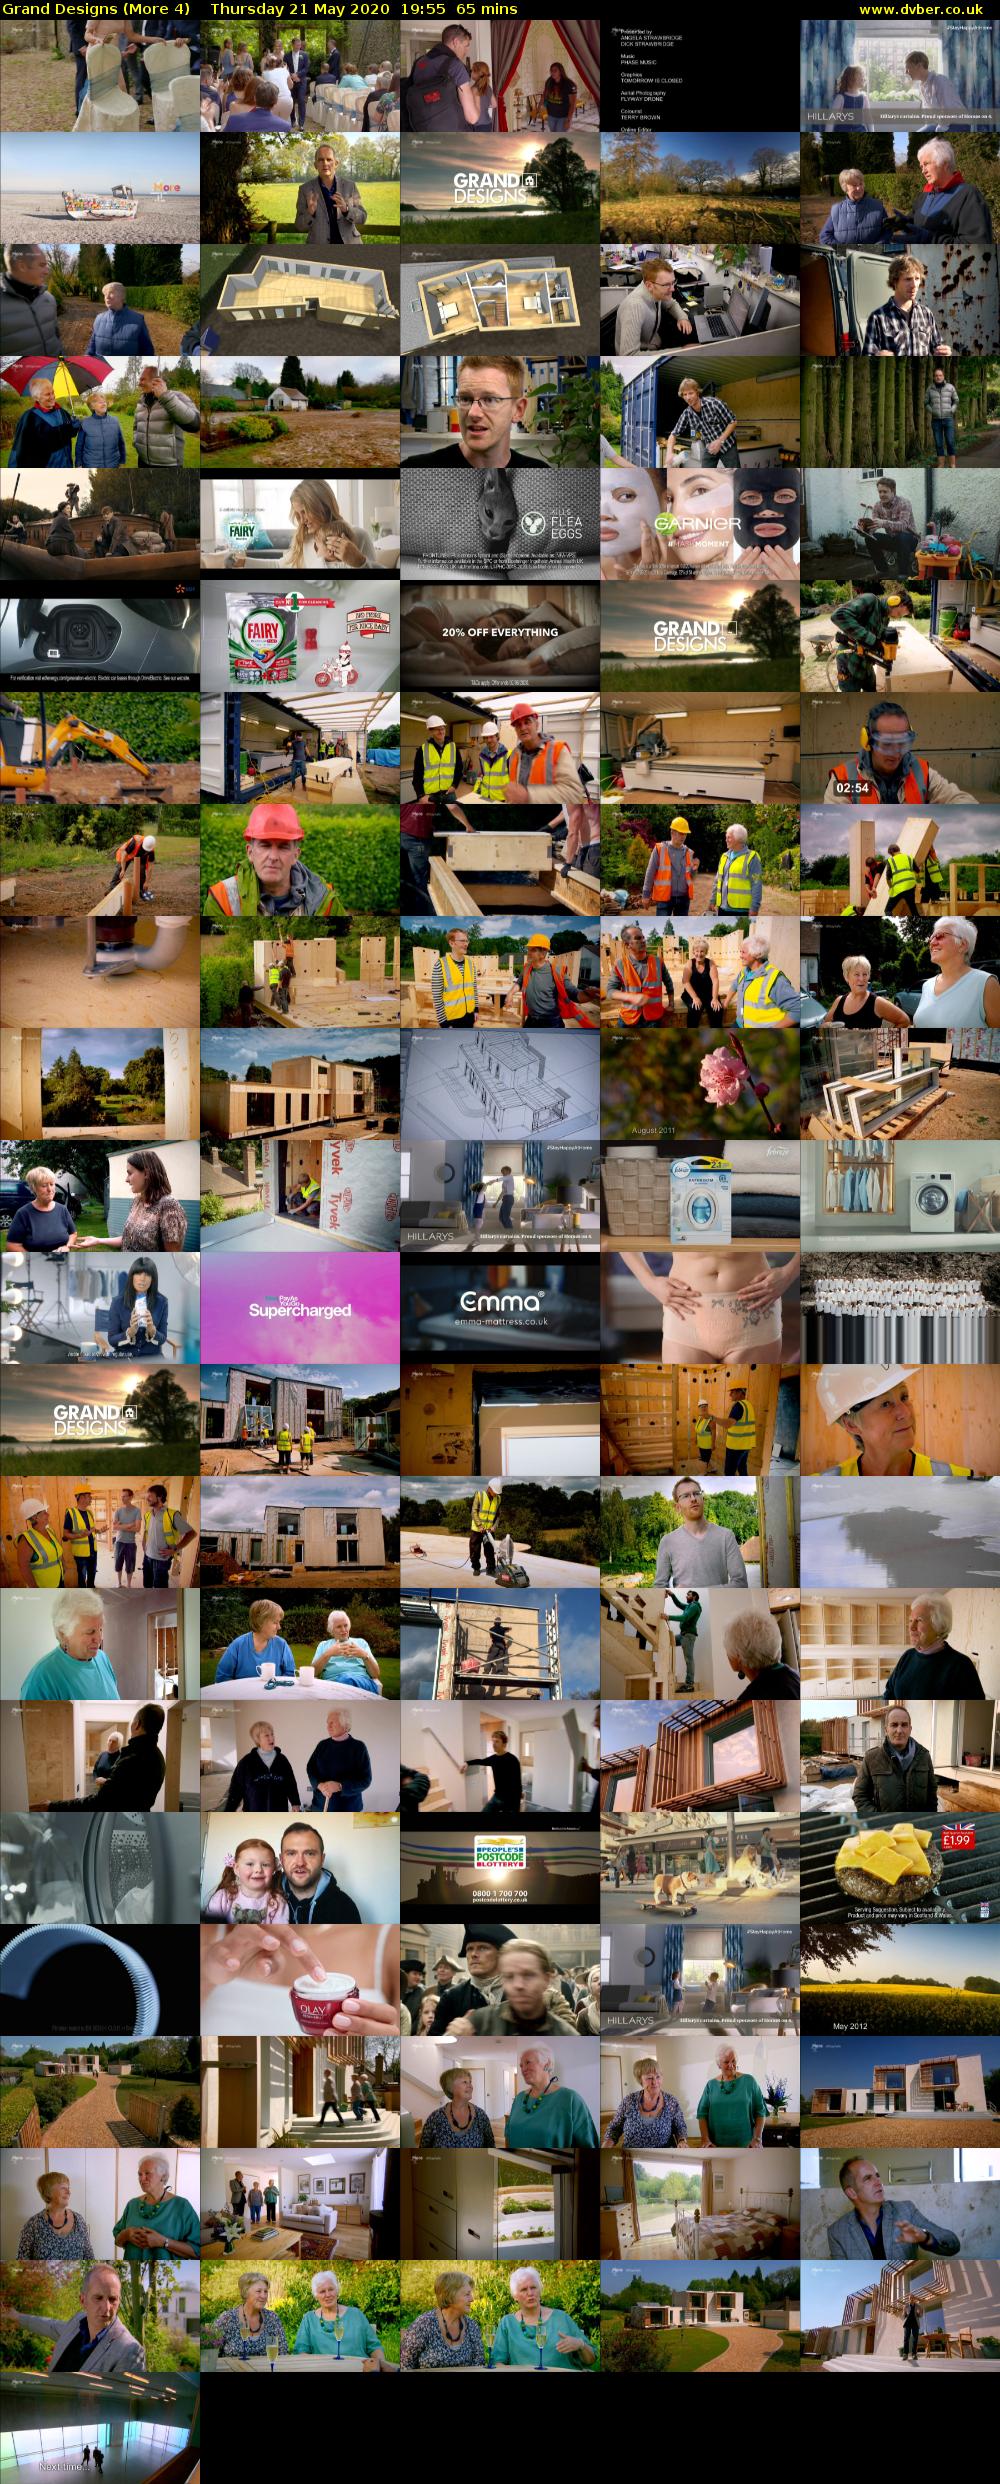 Grand Designs (More 4) Thursday 21 May 2020 19:55 - 21:00